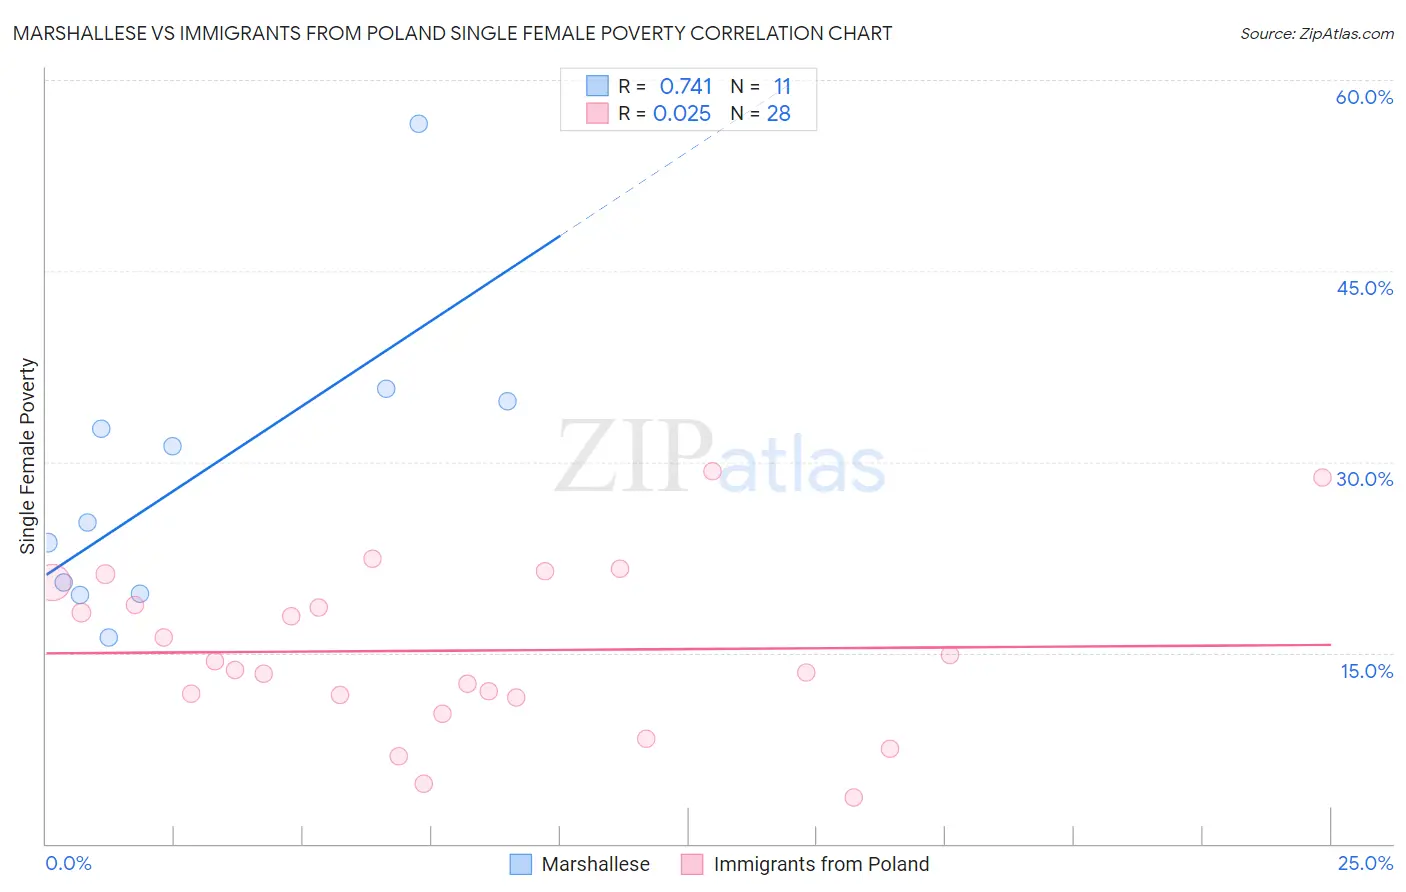 Marshallese vs Immigrants from Poland Single Female Poverty